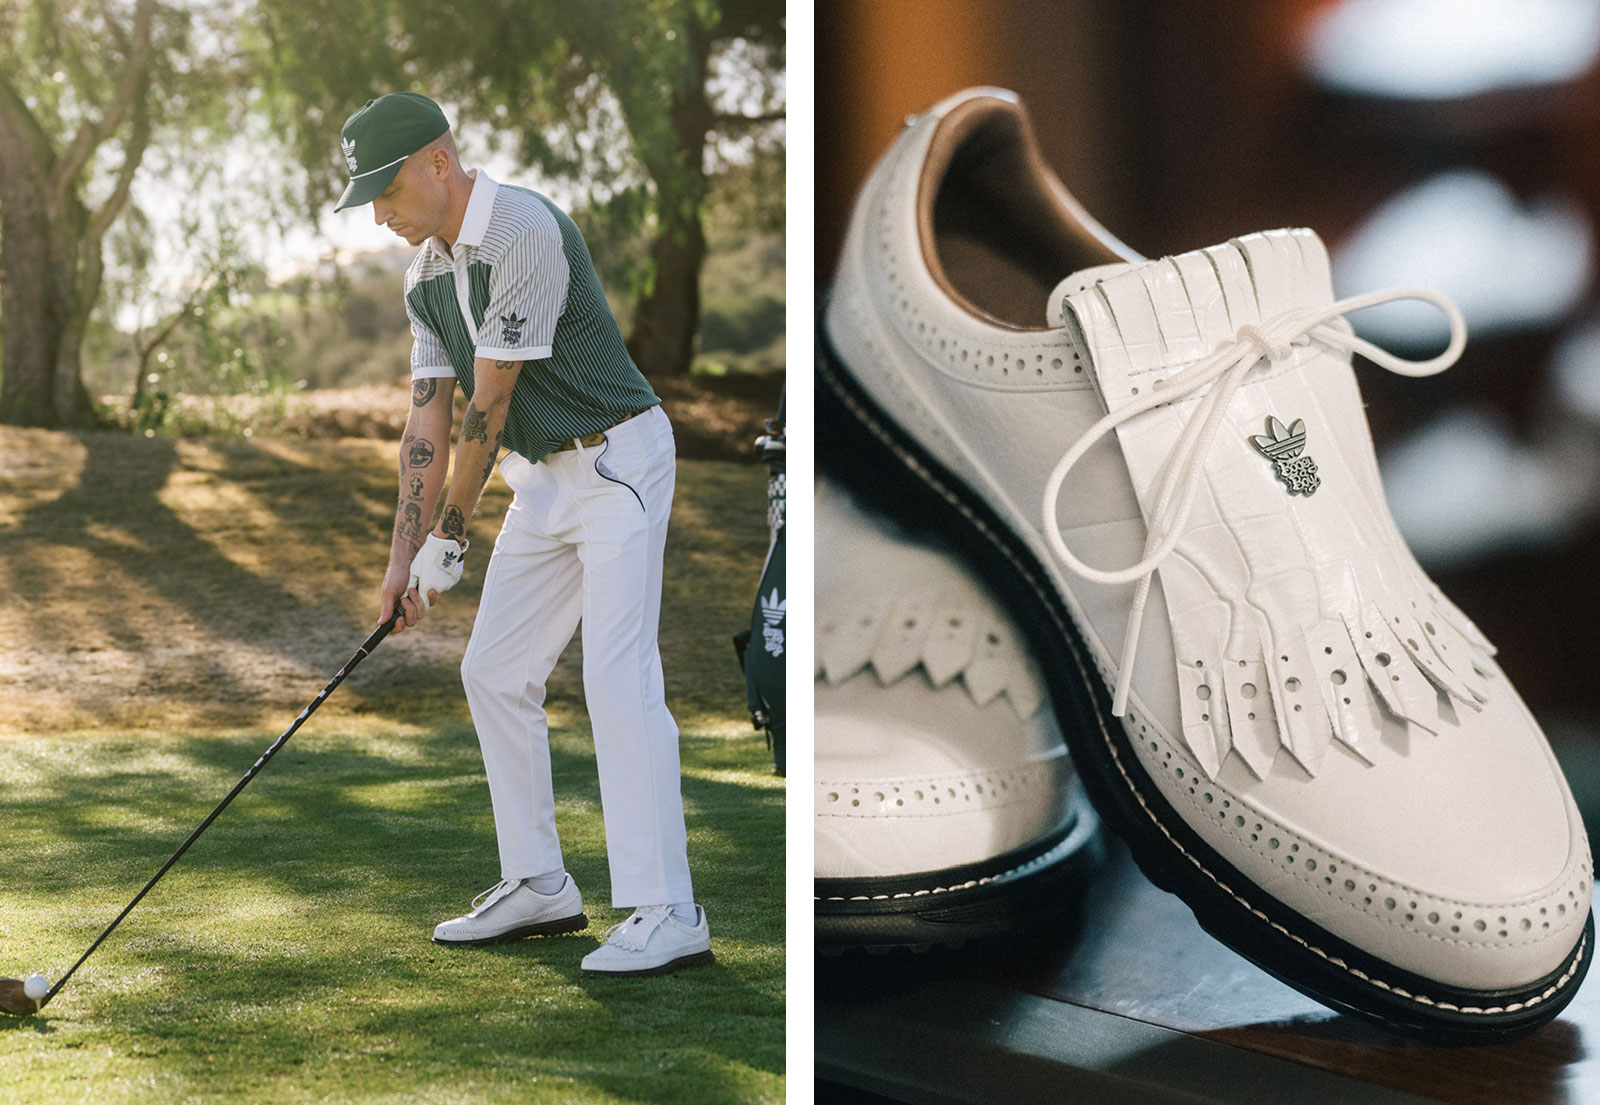 Adidas-and-Bogey-Boys-collaborate-for-a-limited-edition-retro-golf-fashion-and footwear collection